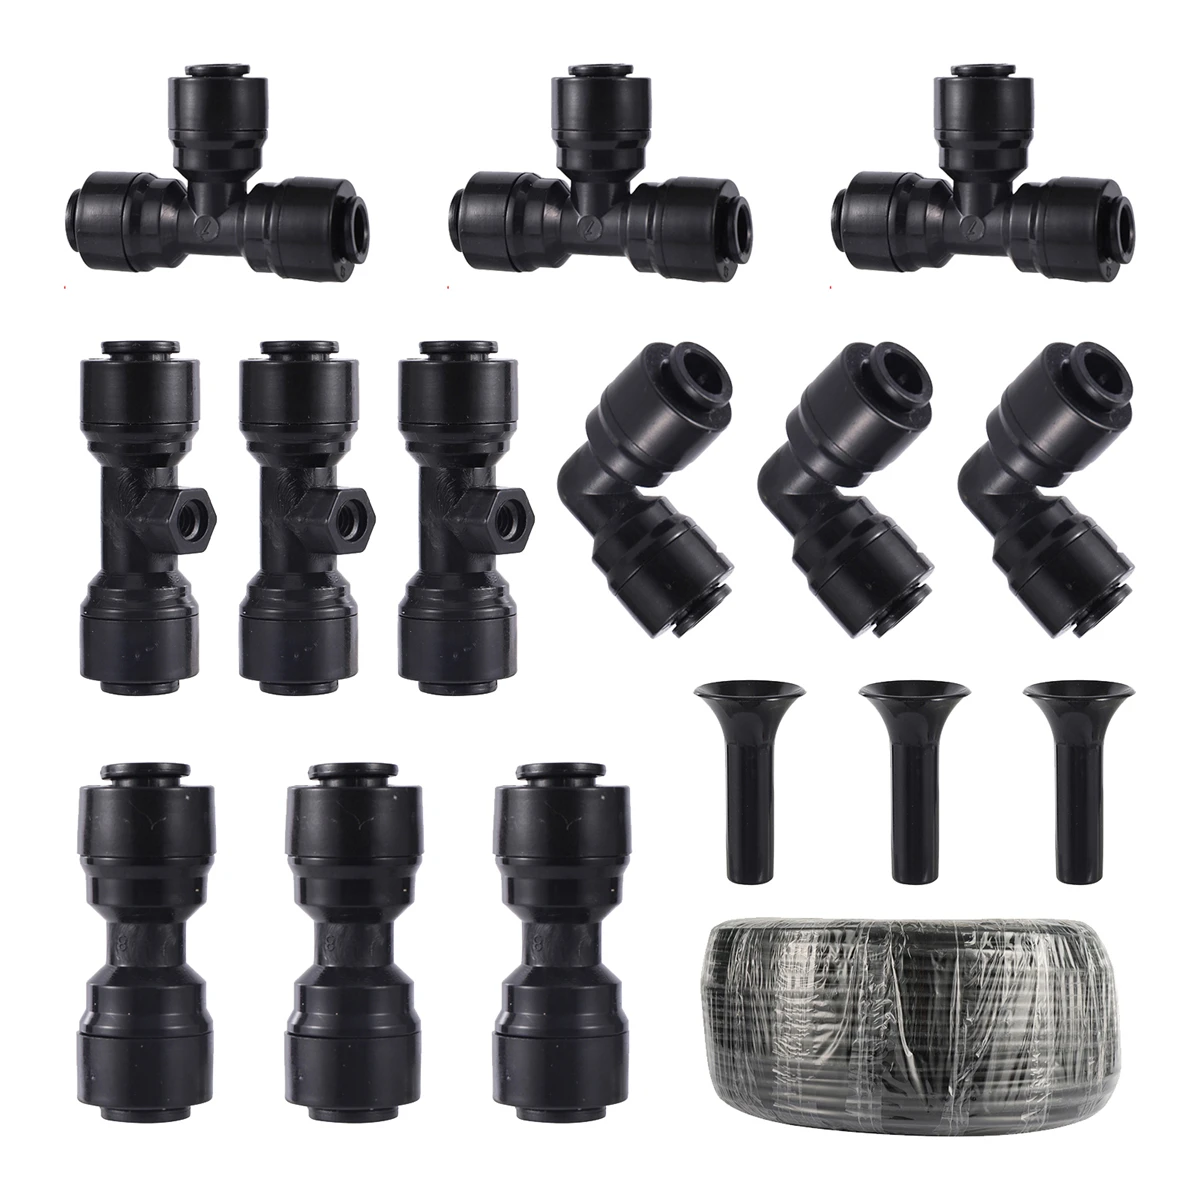 

1/4" Slip Locked Black Quick Connectors Tee Elbow Straight End Plug Joints Home Kitchen Water Pipe Couplings Watering Fittings